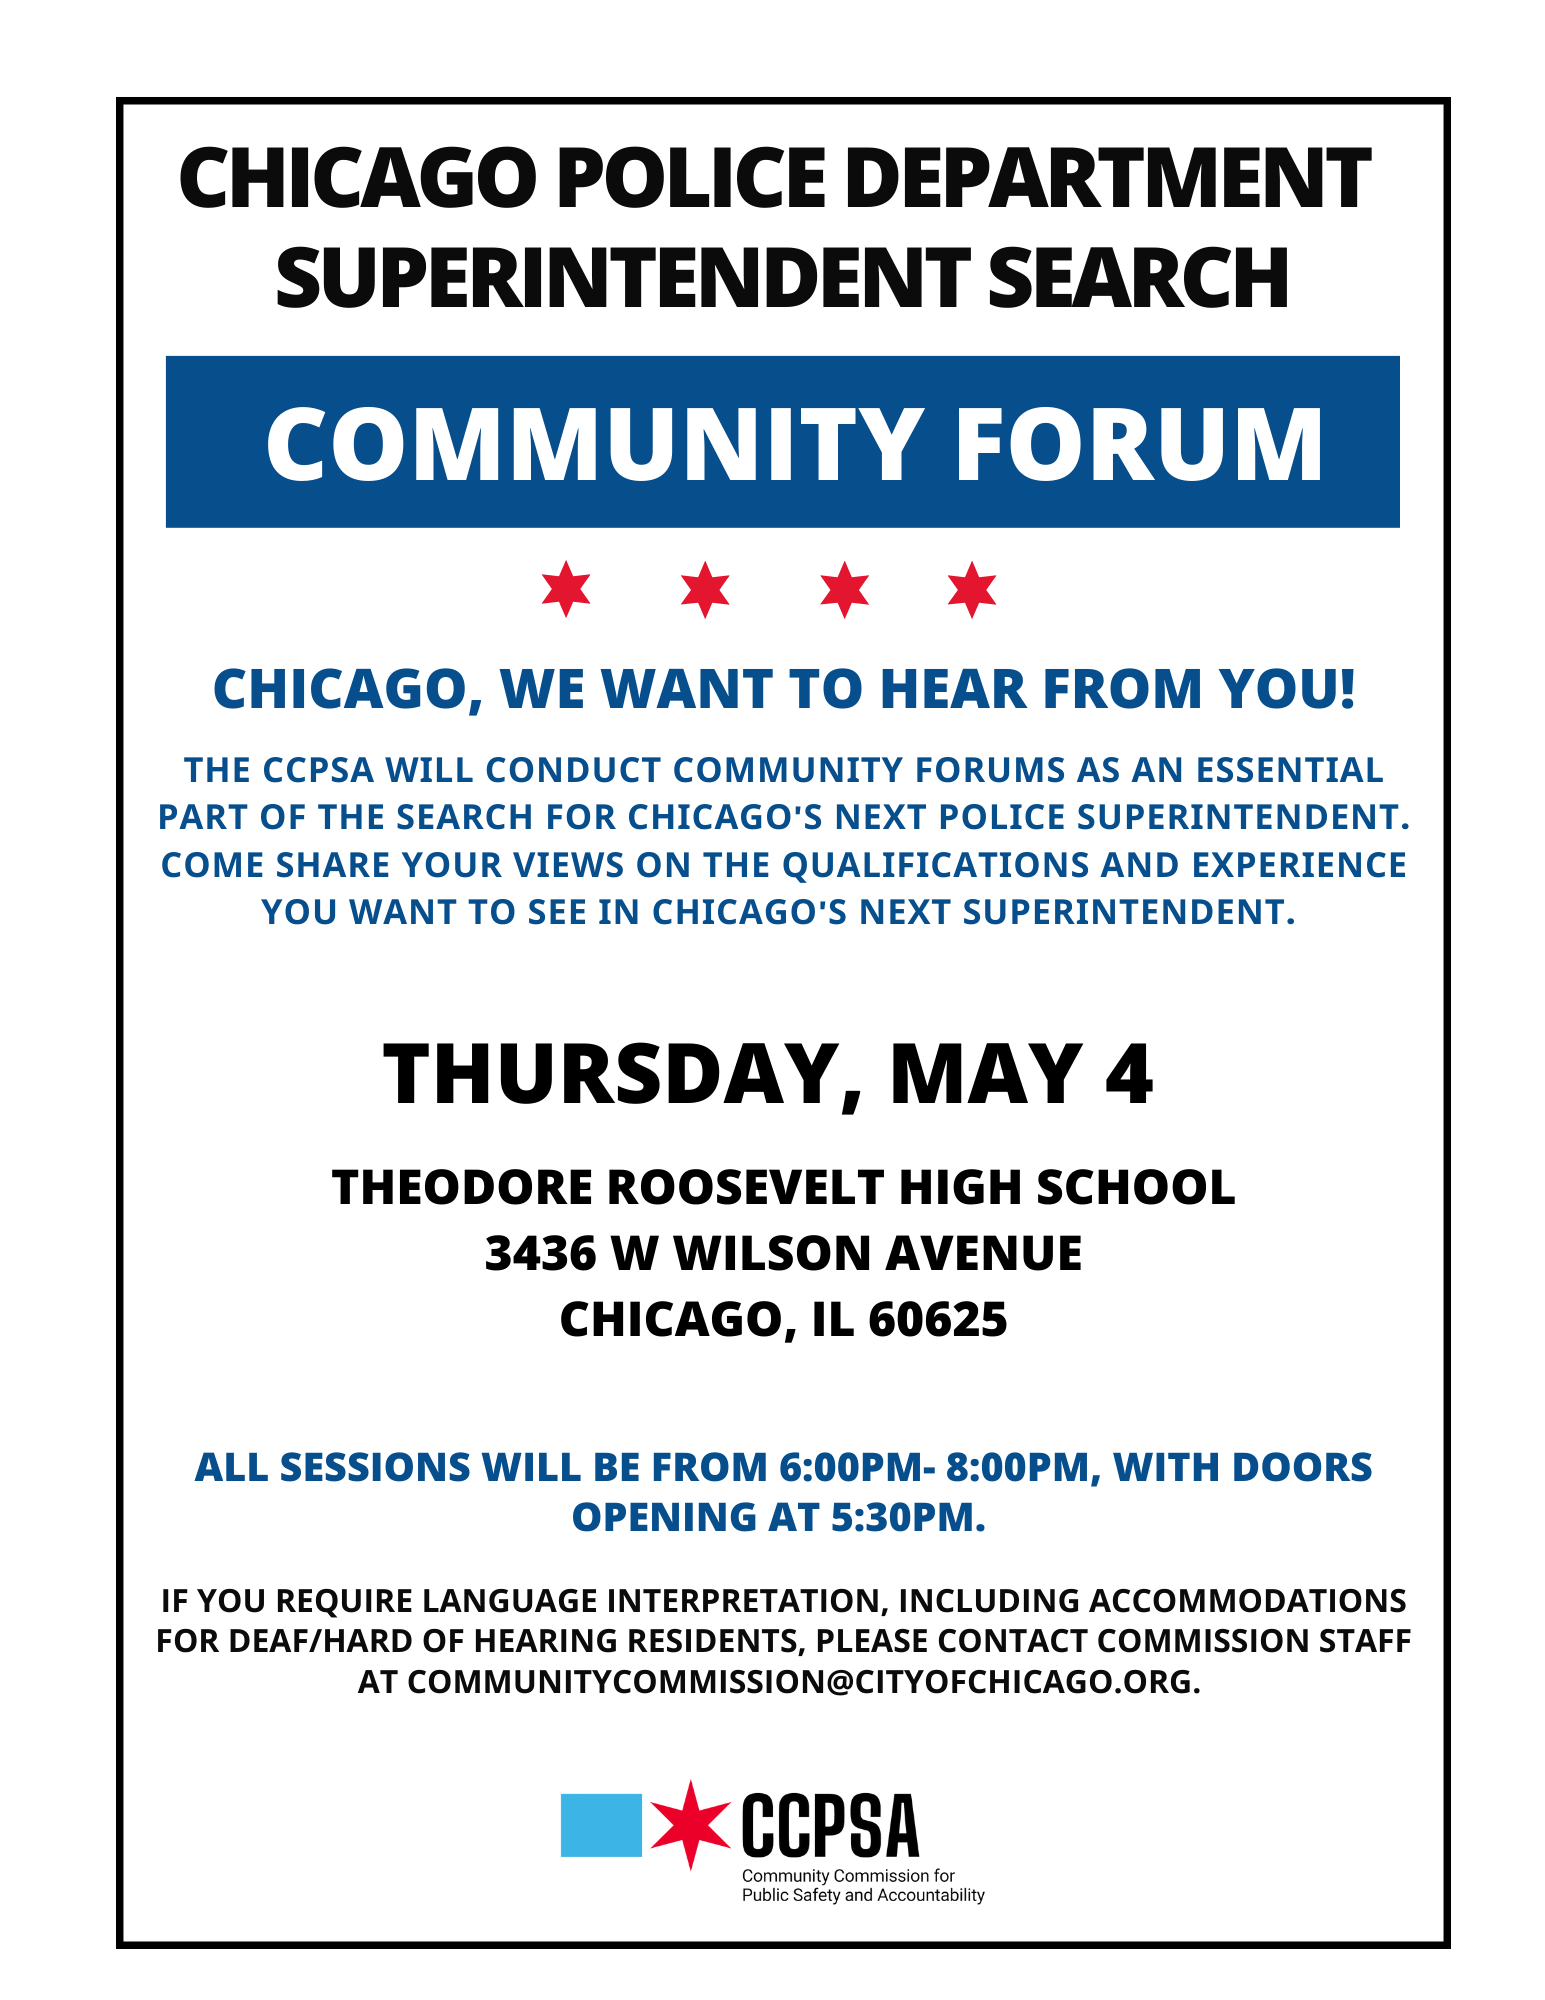 Superintendent Search Community Forum North Side